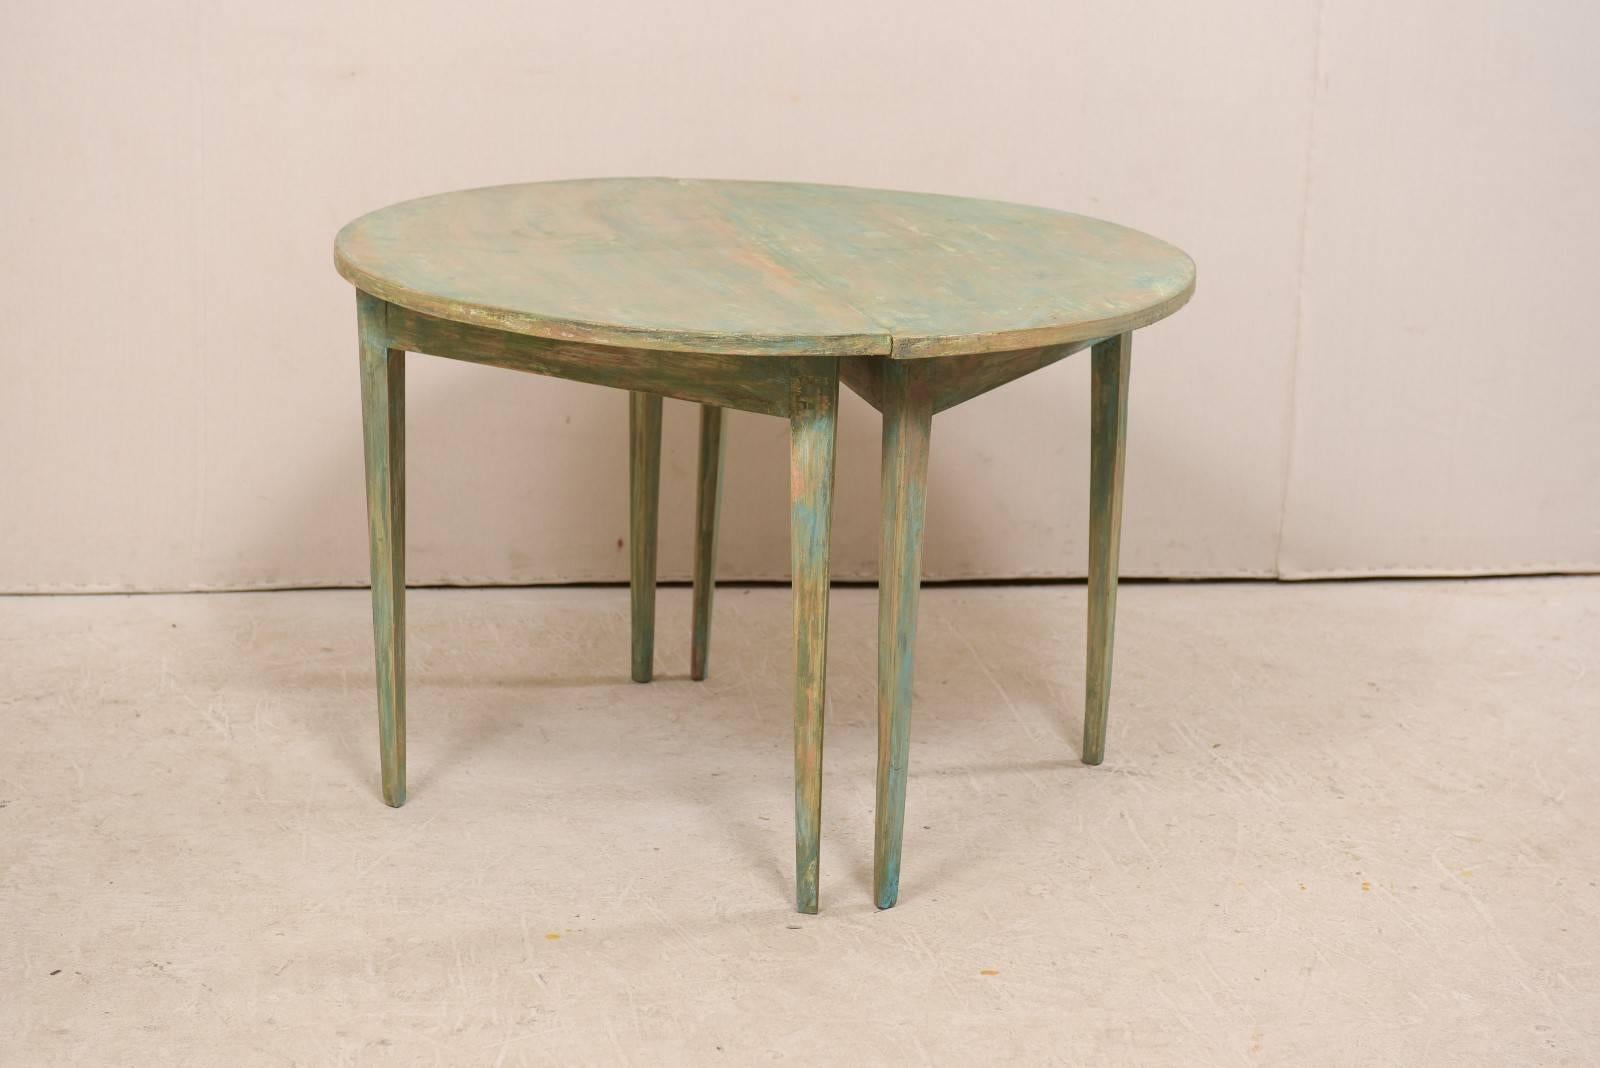 Pair of Swedish 19th Century Painted Wood Demilune Tables with Tapered Legs 8